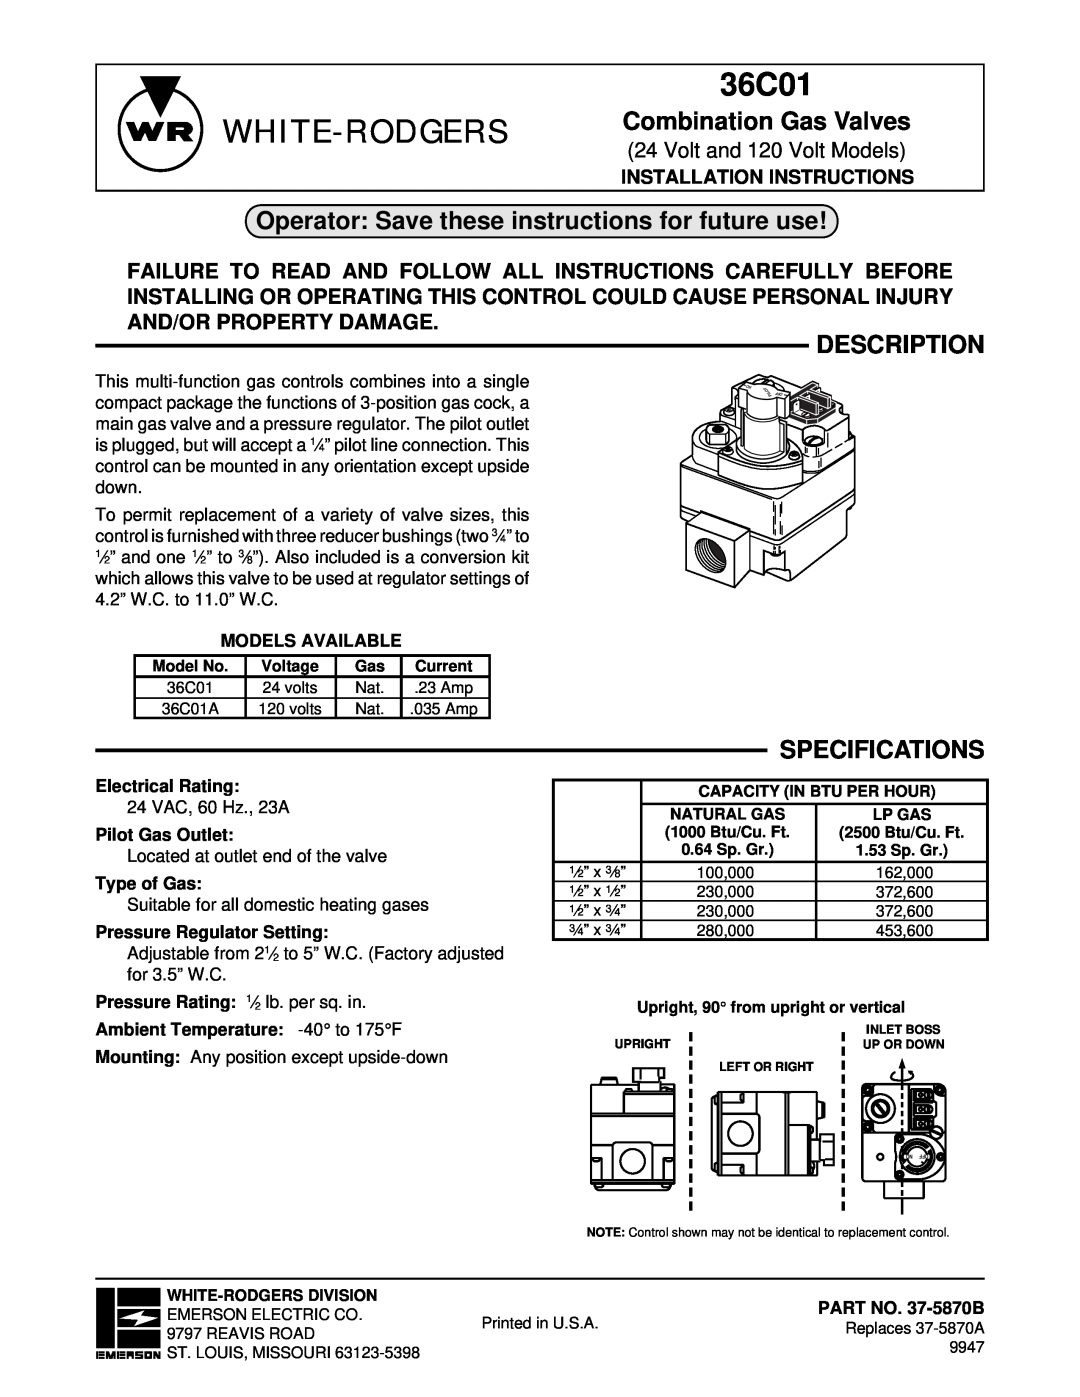 White Rodgers 36C01 installation instructions Operator Save these instructions for future use, Description, Specifications 